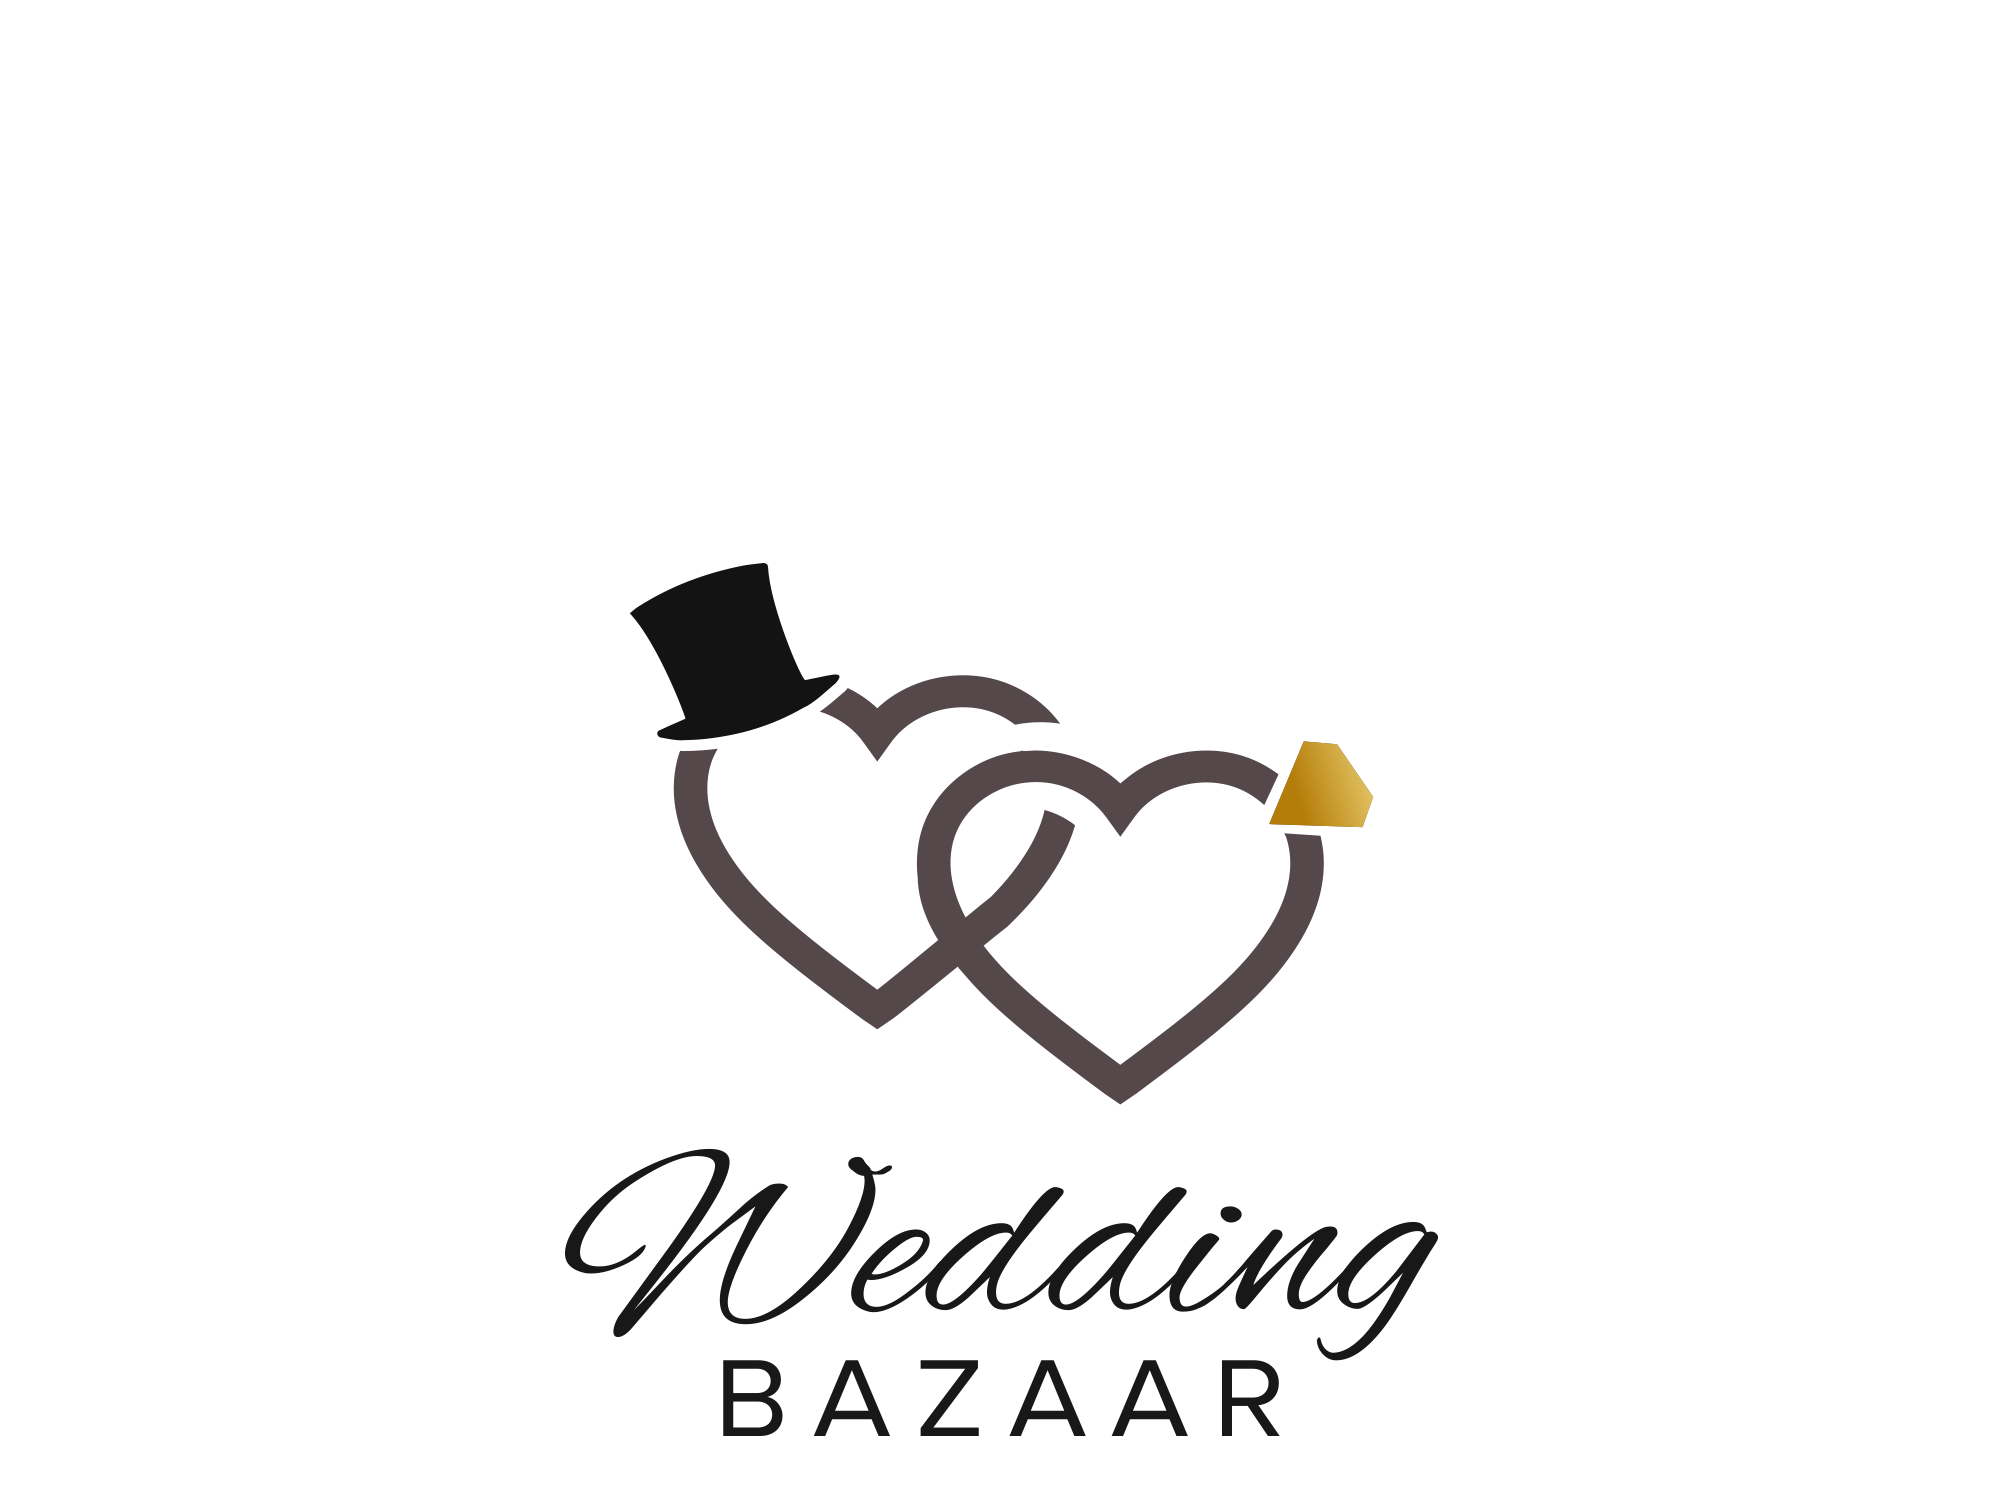 Free wedding logo templates to customize and print | Canva